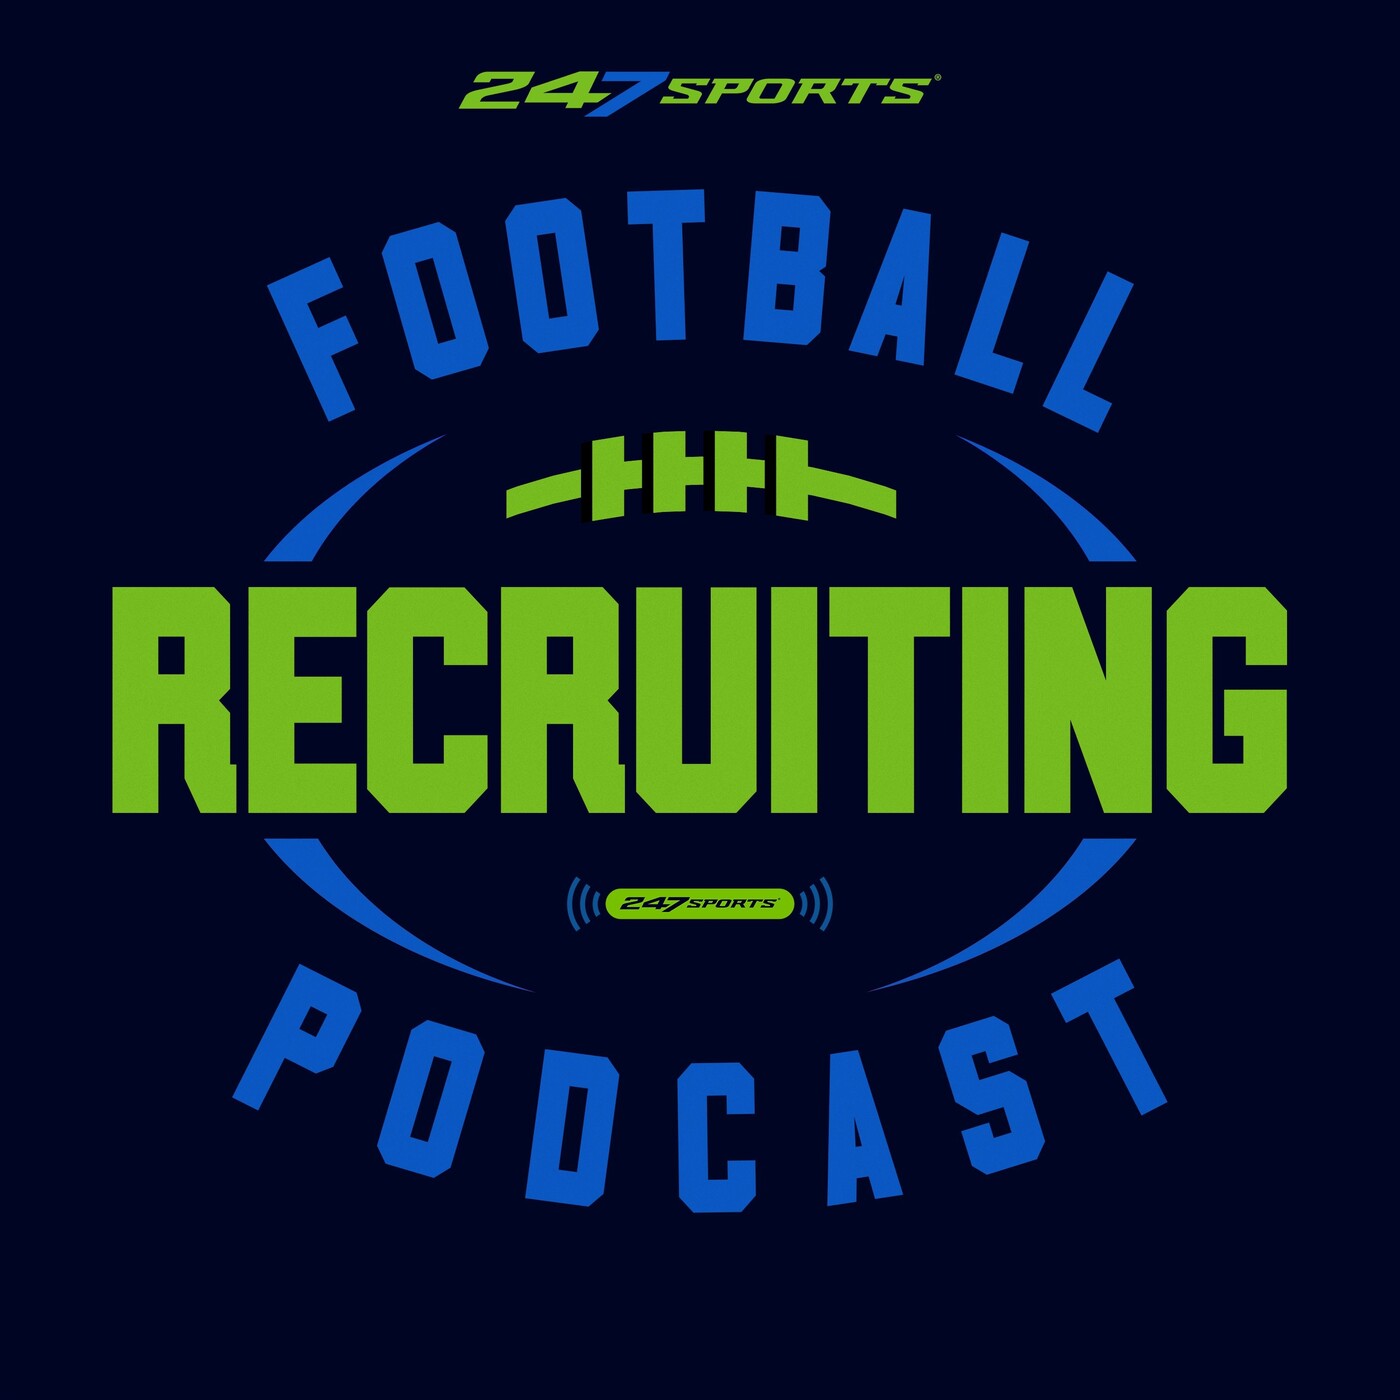 Introducing the 247Sports College Football Recruiting Podcast en The